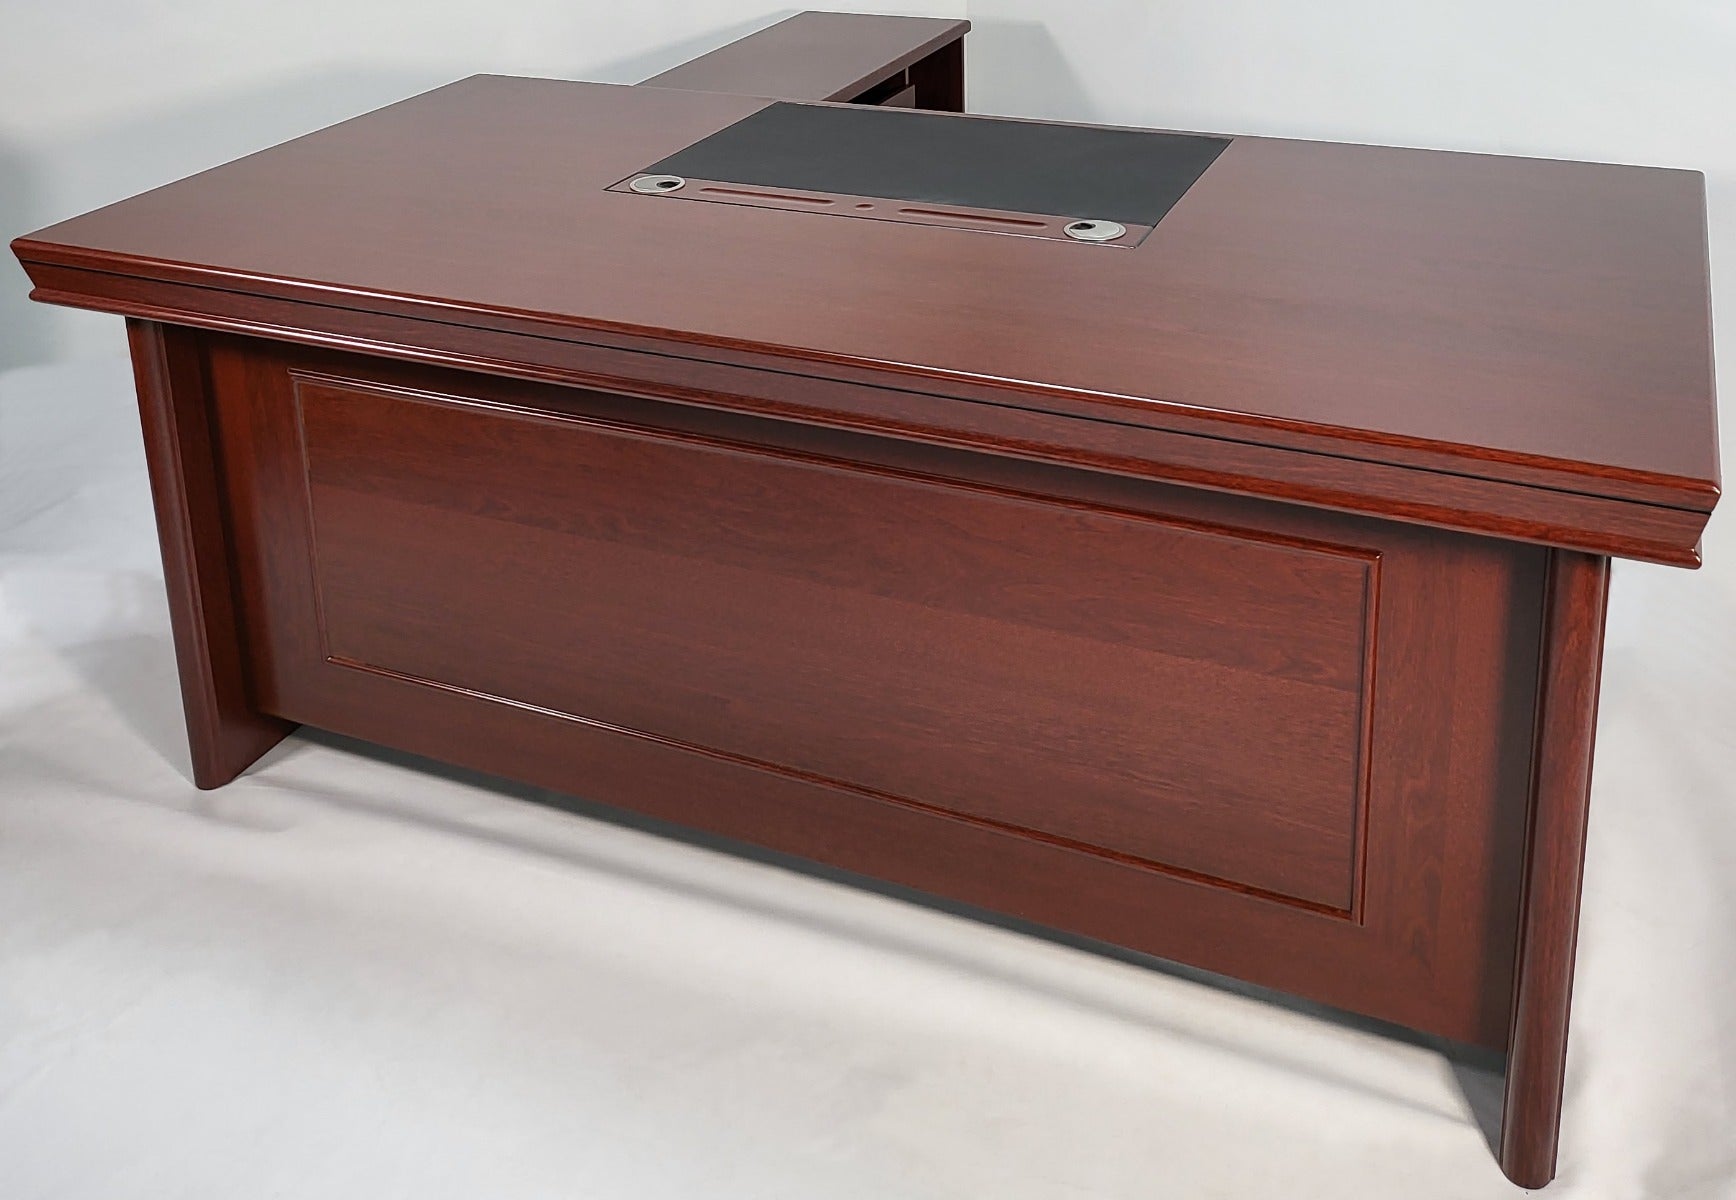 Mahogany Executive Office Desk with Pedestal and Return - 1830 UK